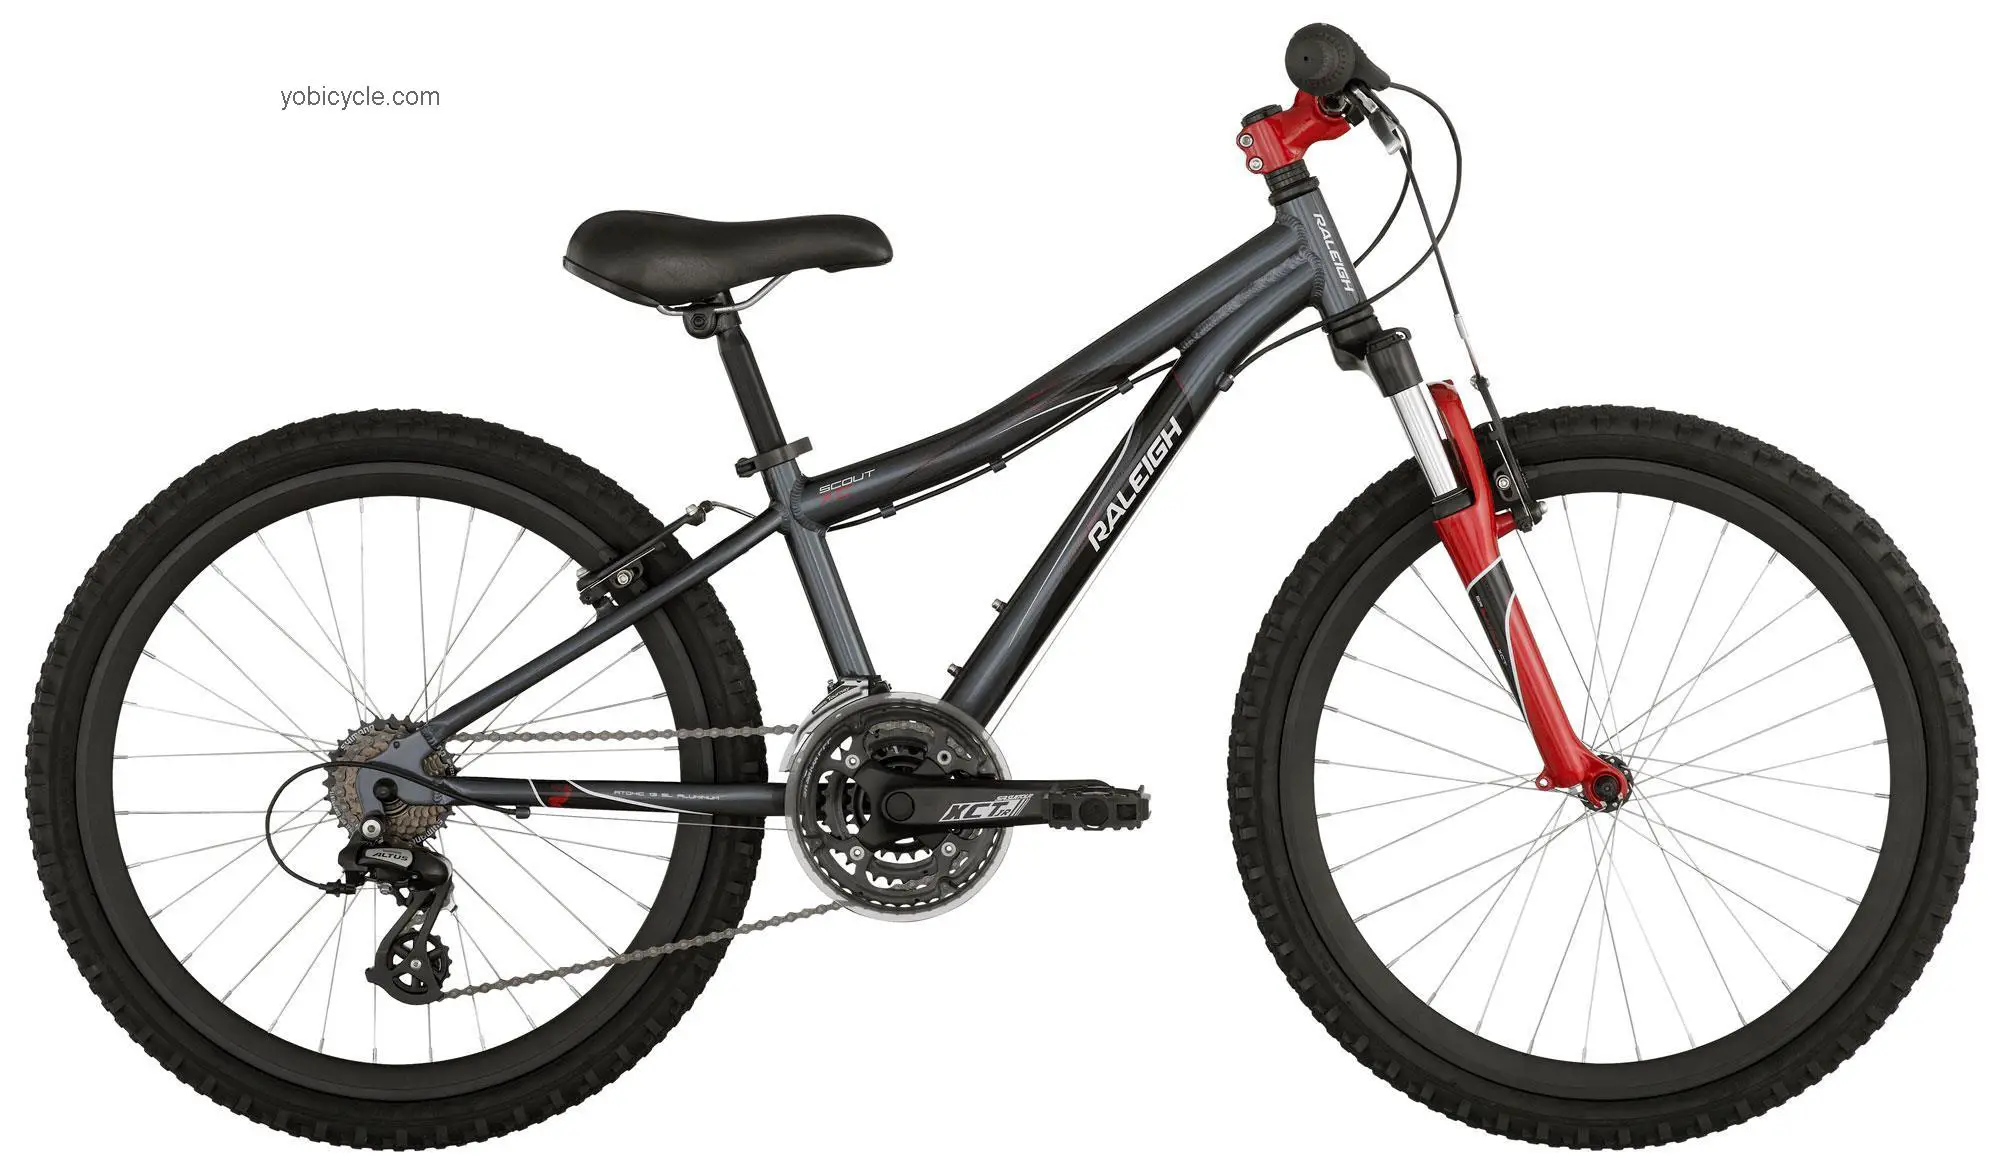 Raleigh Scout XC competitors and comparison tool online specs and performance